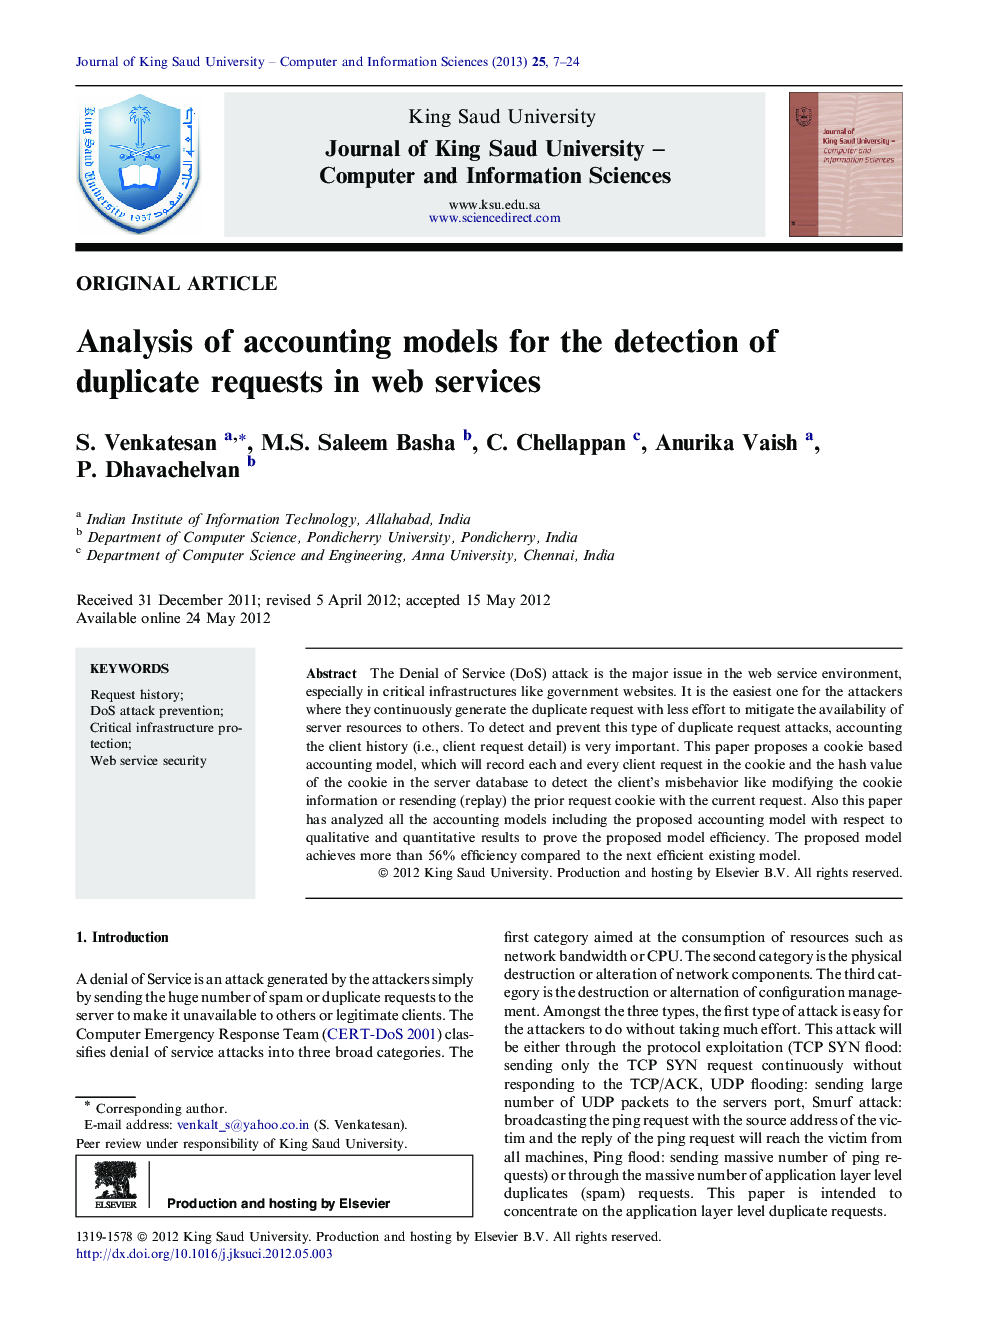 Analysis of accounting models for the detection of duplicate requests in web services 